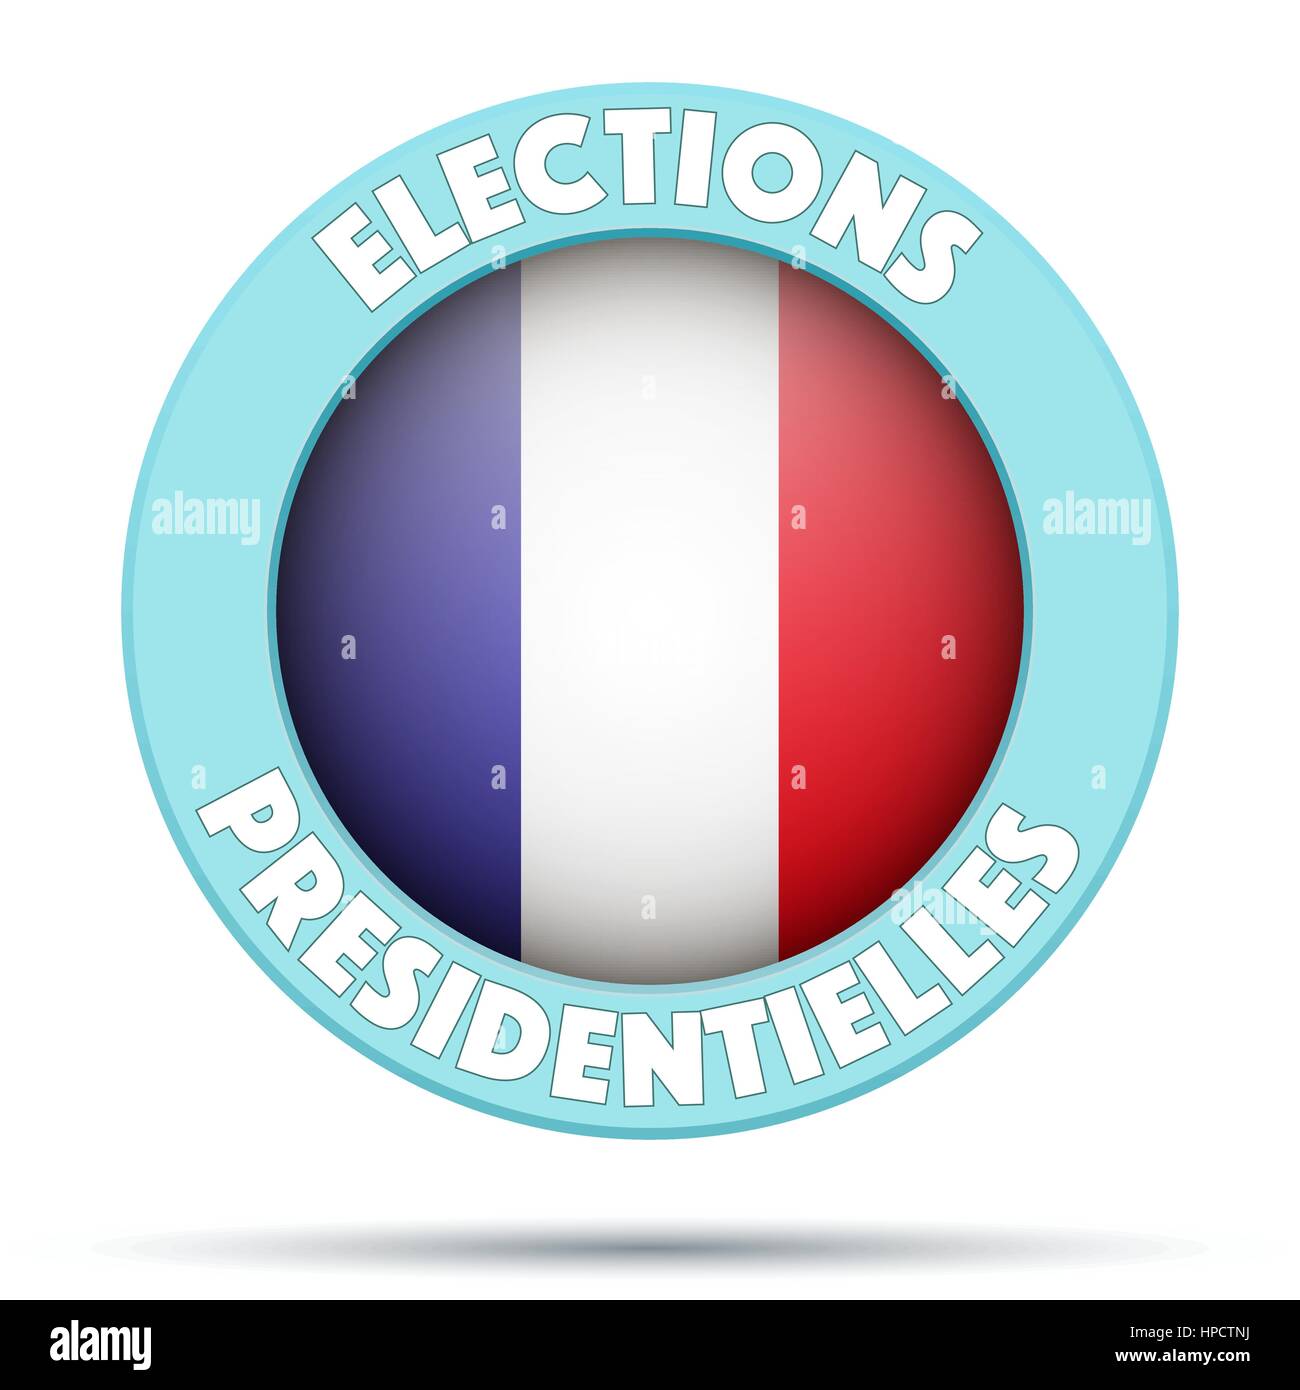 Circle Symbol of Election 2017 in France. Stock Vector